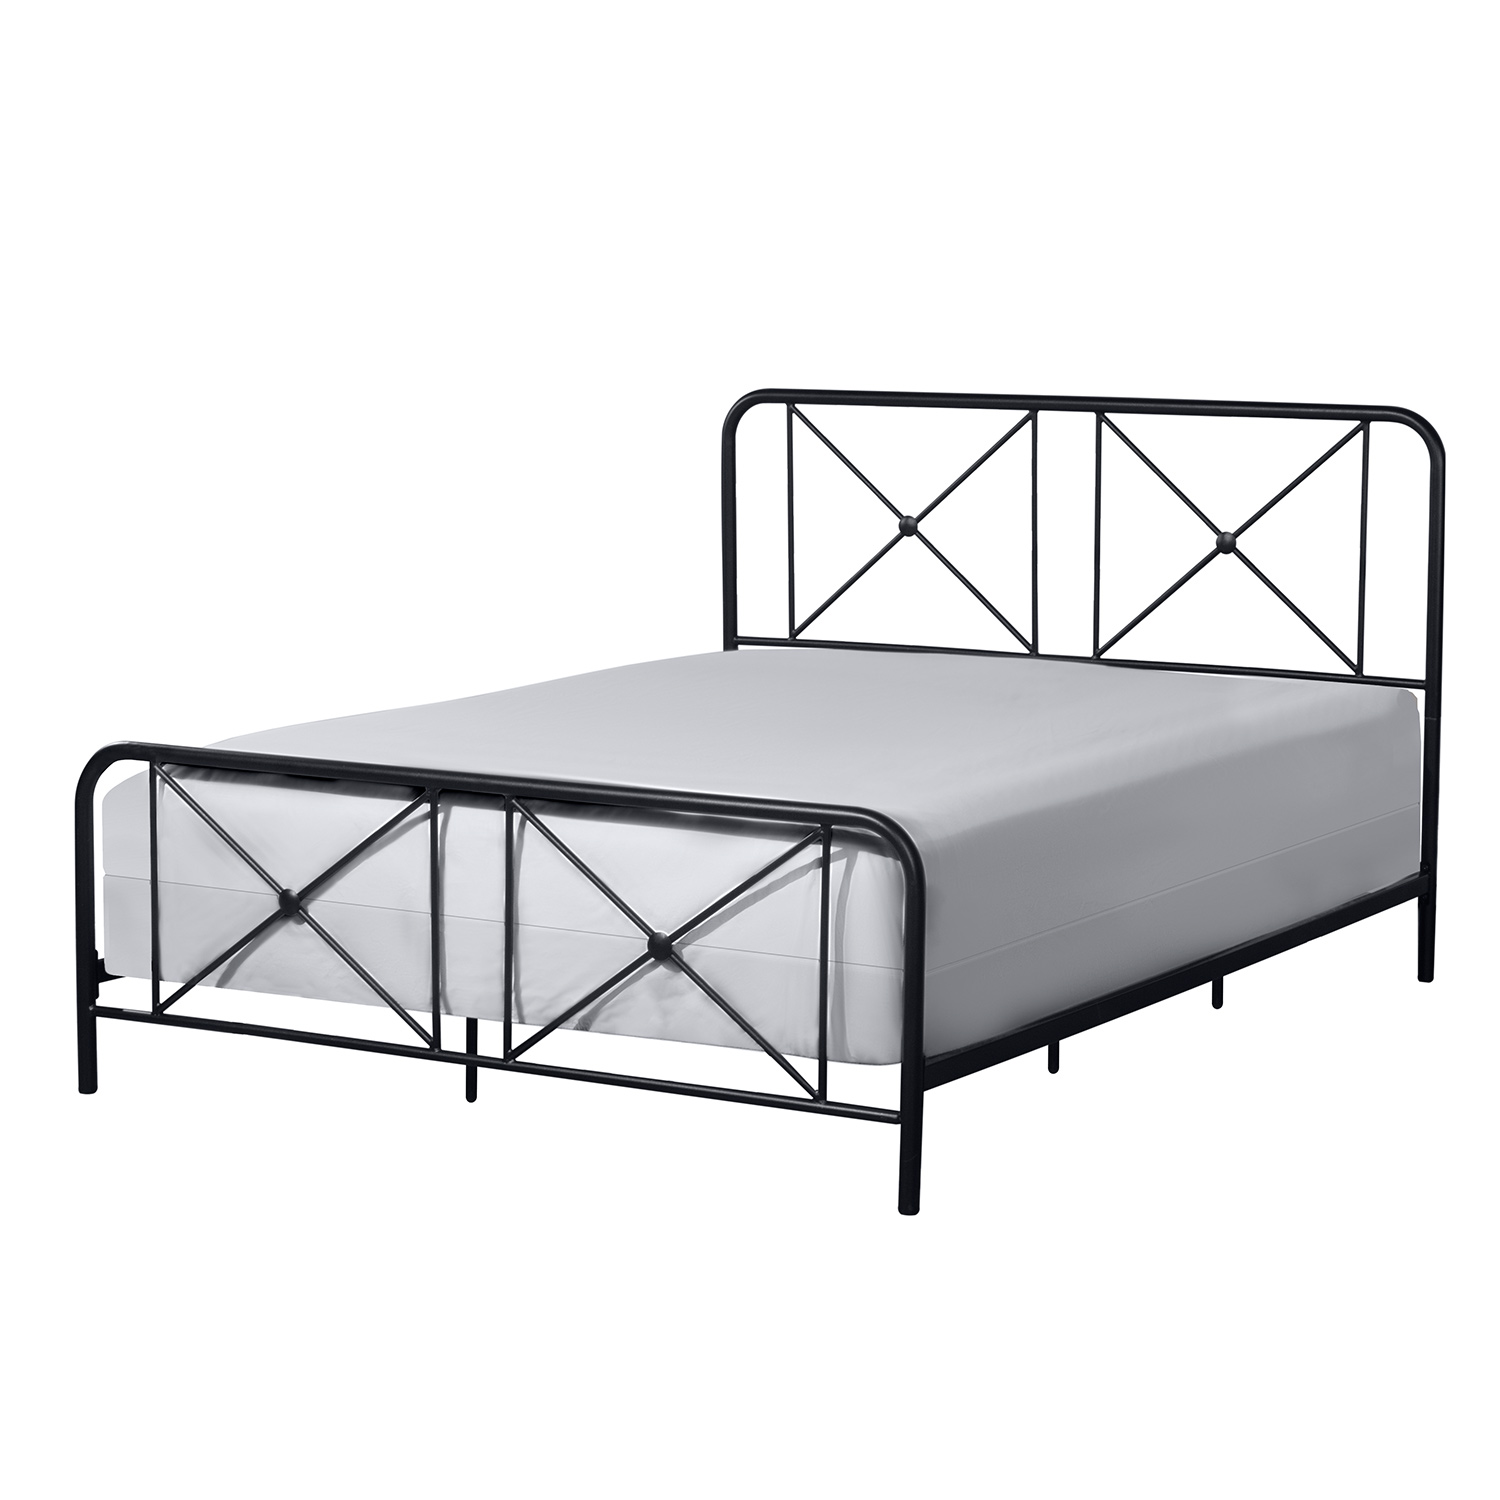 Hillsdale Williamsburg Metal Bed with Decorative Double X Design - Black